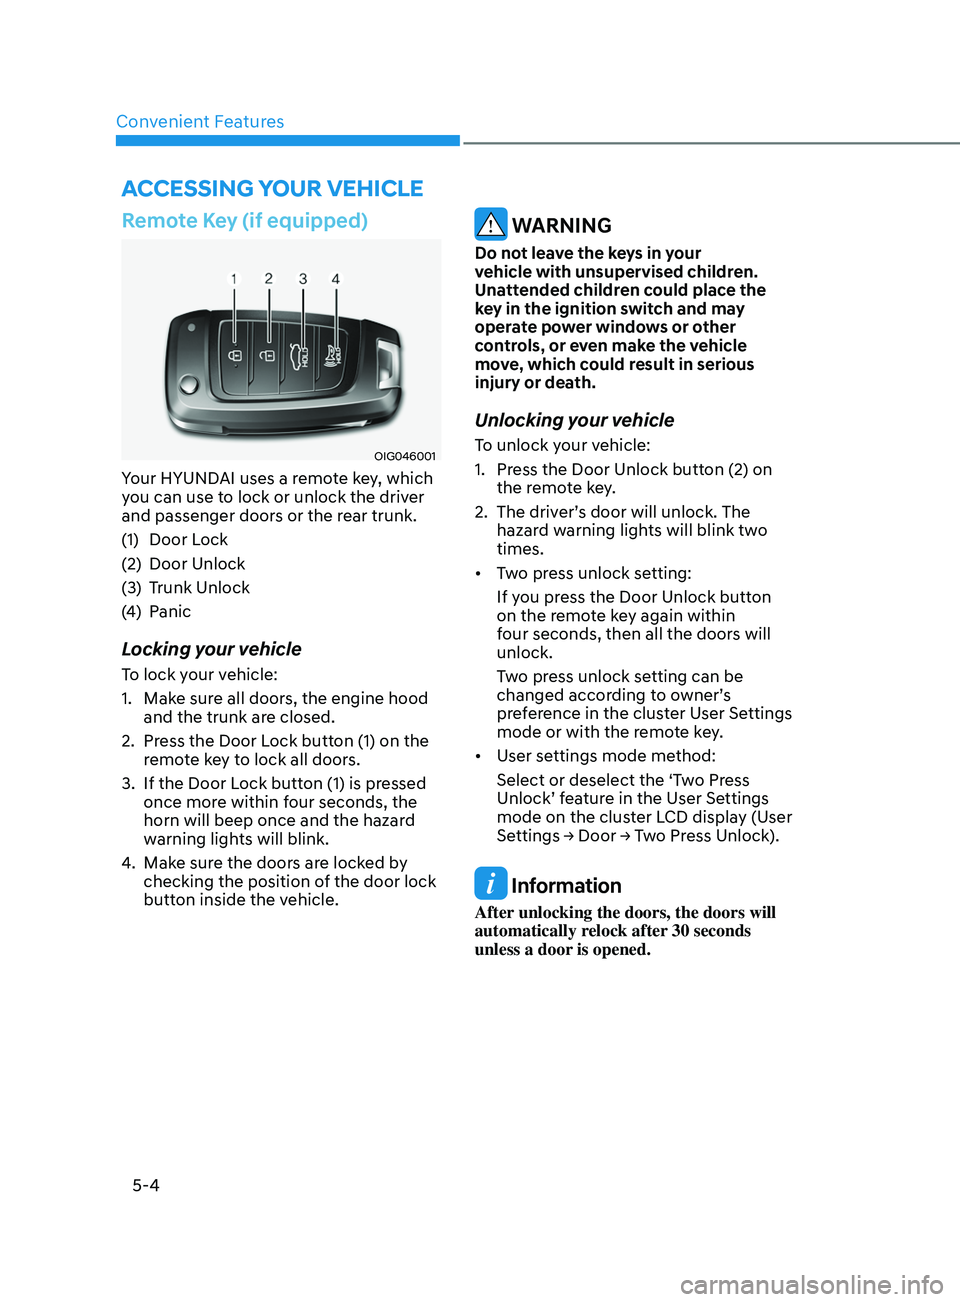 HYUNDAI SONATA 2022  Owners Manual Convenient Features
5-4
Remote Key (if equipped)
OIG046001
Your HYUNDAI uses a remote key, which 
you can use to lock or unlock the driver 
and passenger doors or the rear trunk.
(1) 
Door L
 ock
(2)
